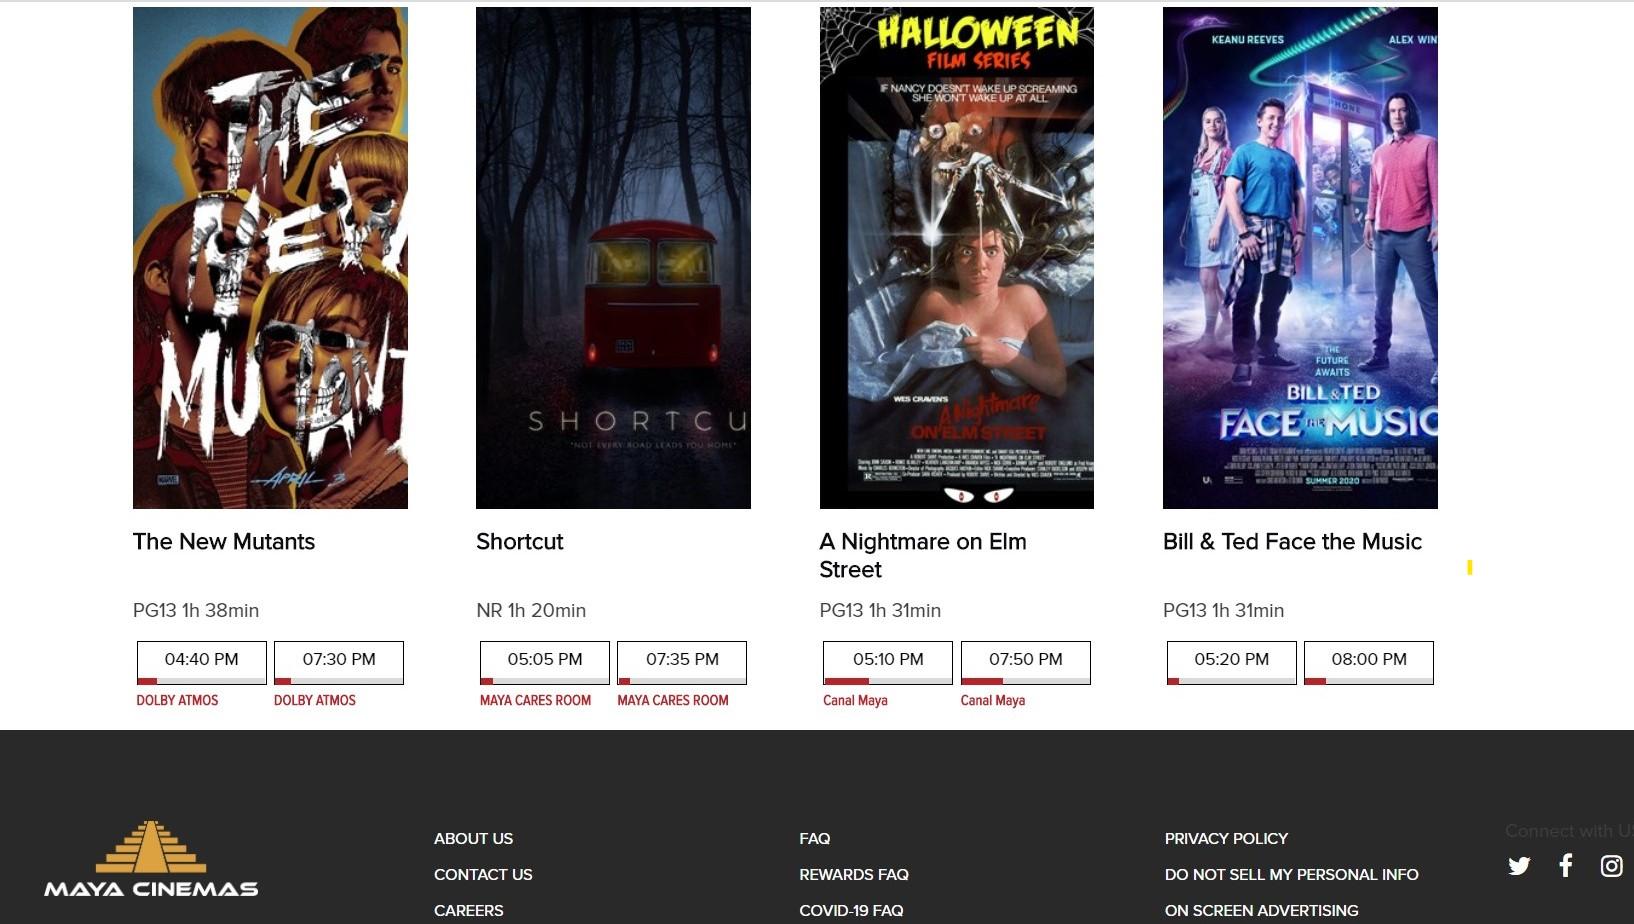 Maya Cinema currently has a mix of new and classic movies currently showing. (Courtesy Maya Cinema website)